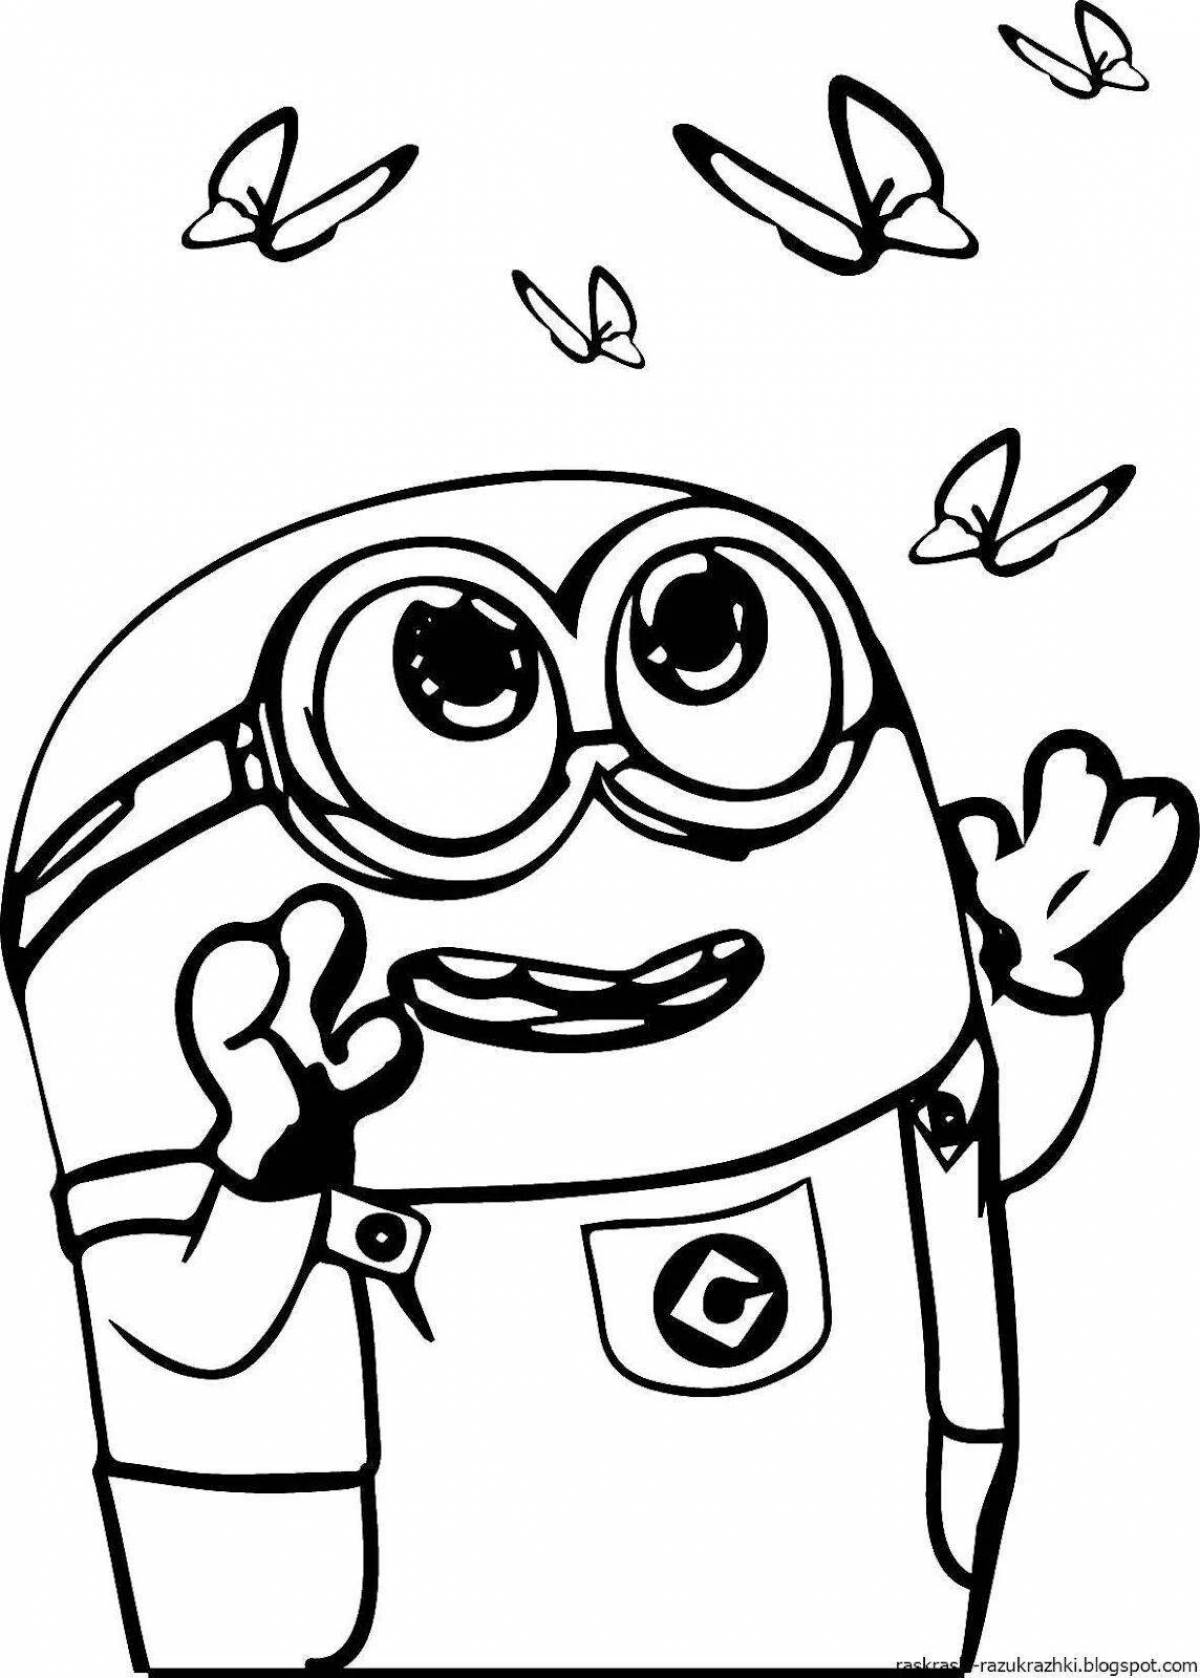 Minions creative coloring book for girls